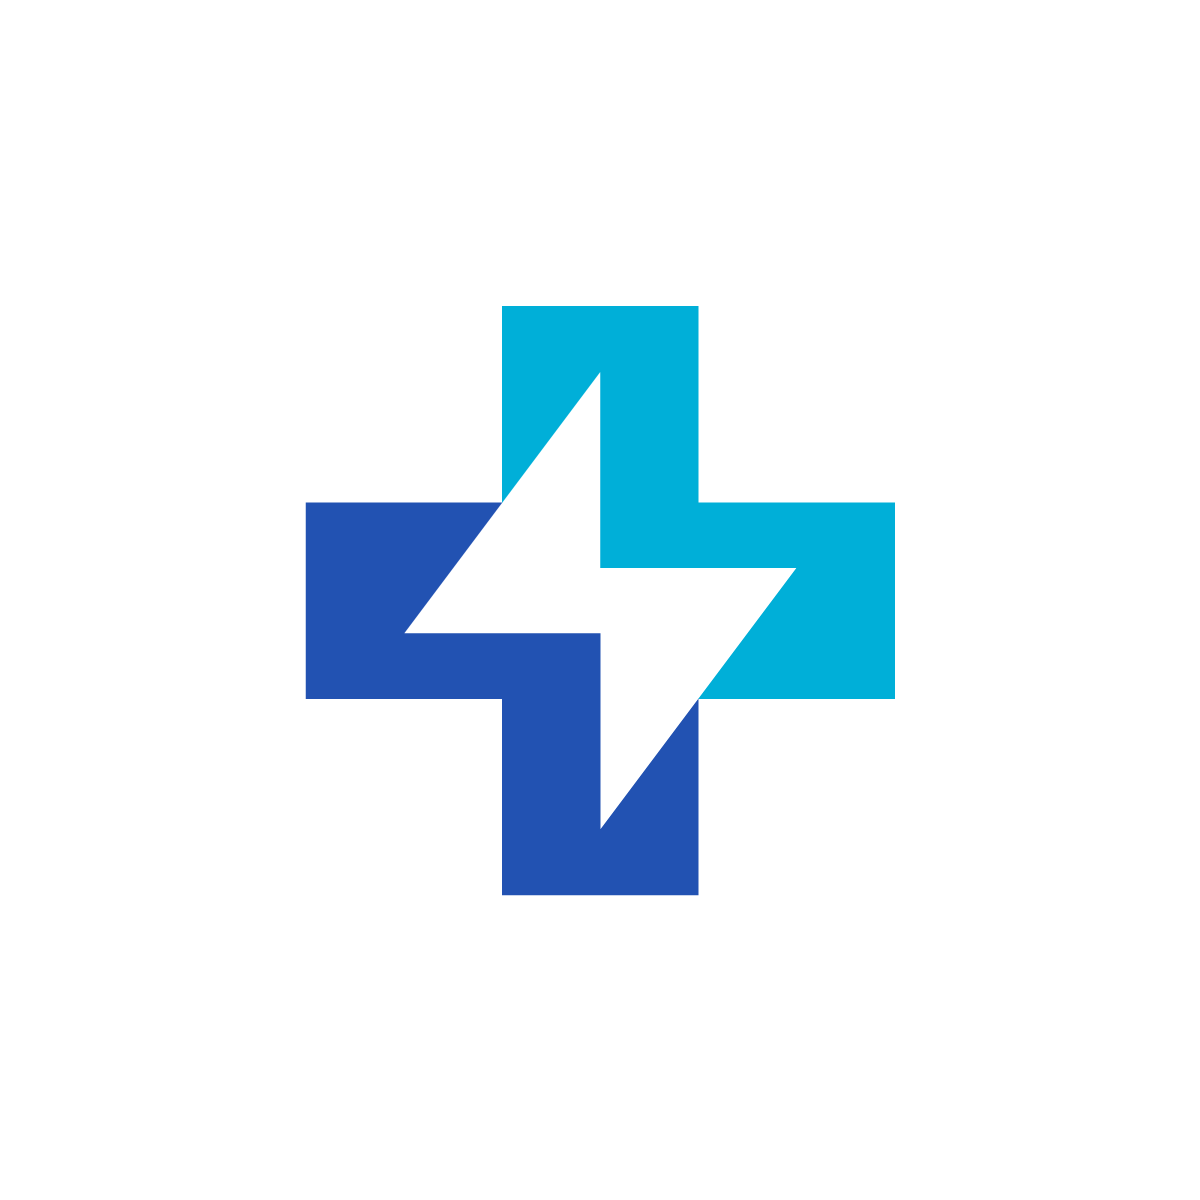 Logo combining medical cross and lightning bolt symbols in negative space, representing speed, precision, and power